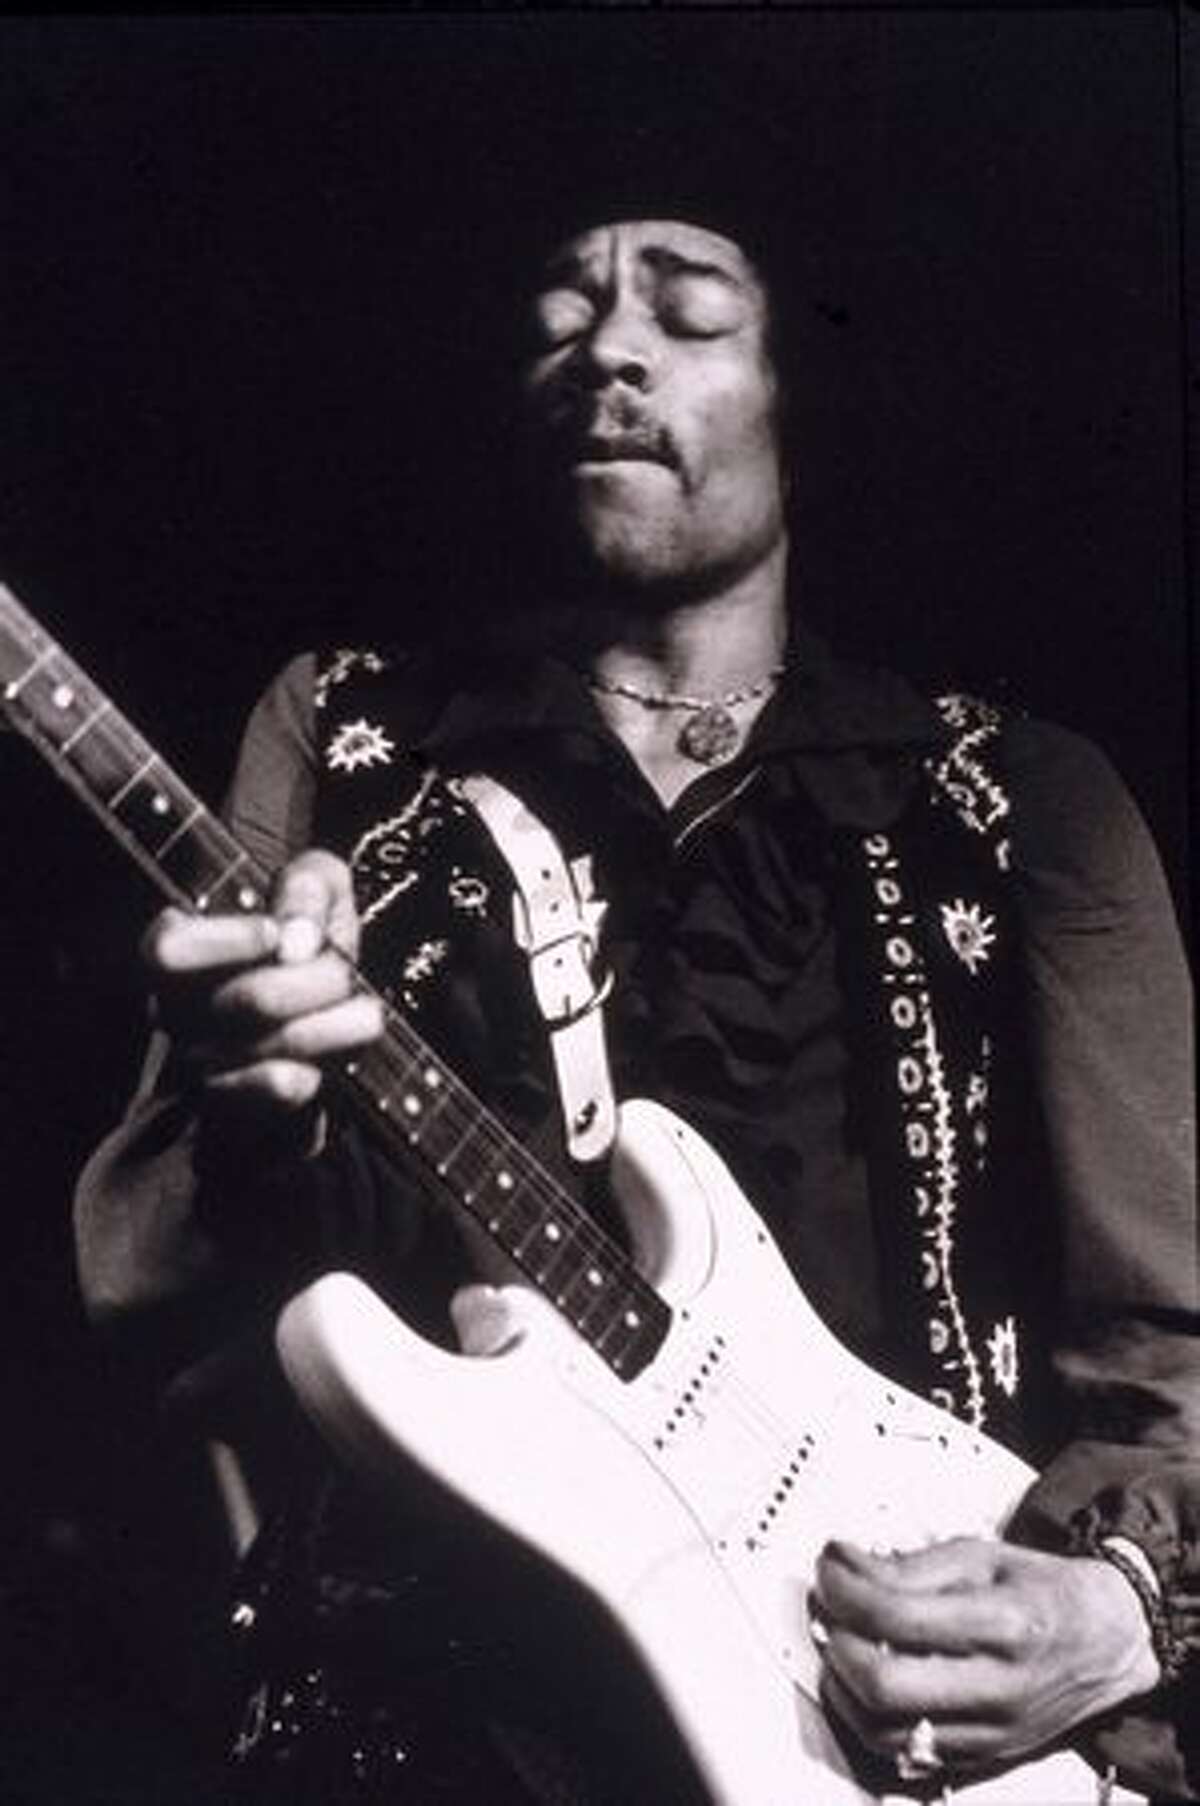 American musician Jimi Hendrix (1942 - 1970) performs onstage, late 1960s.